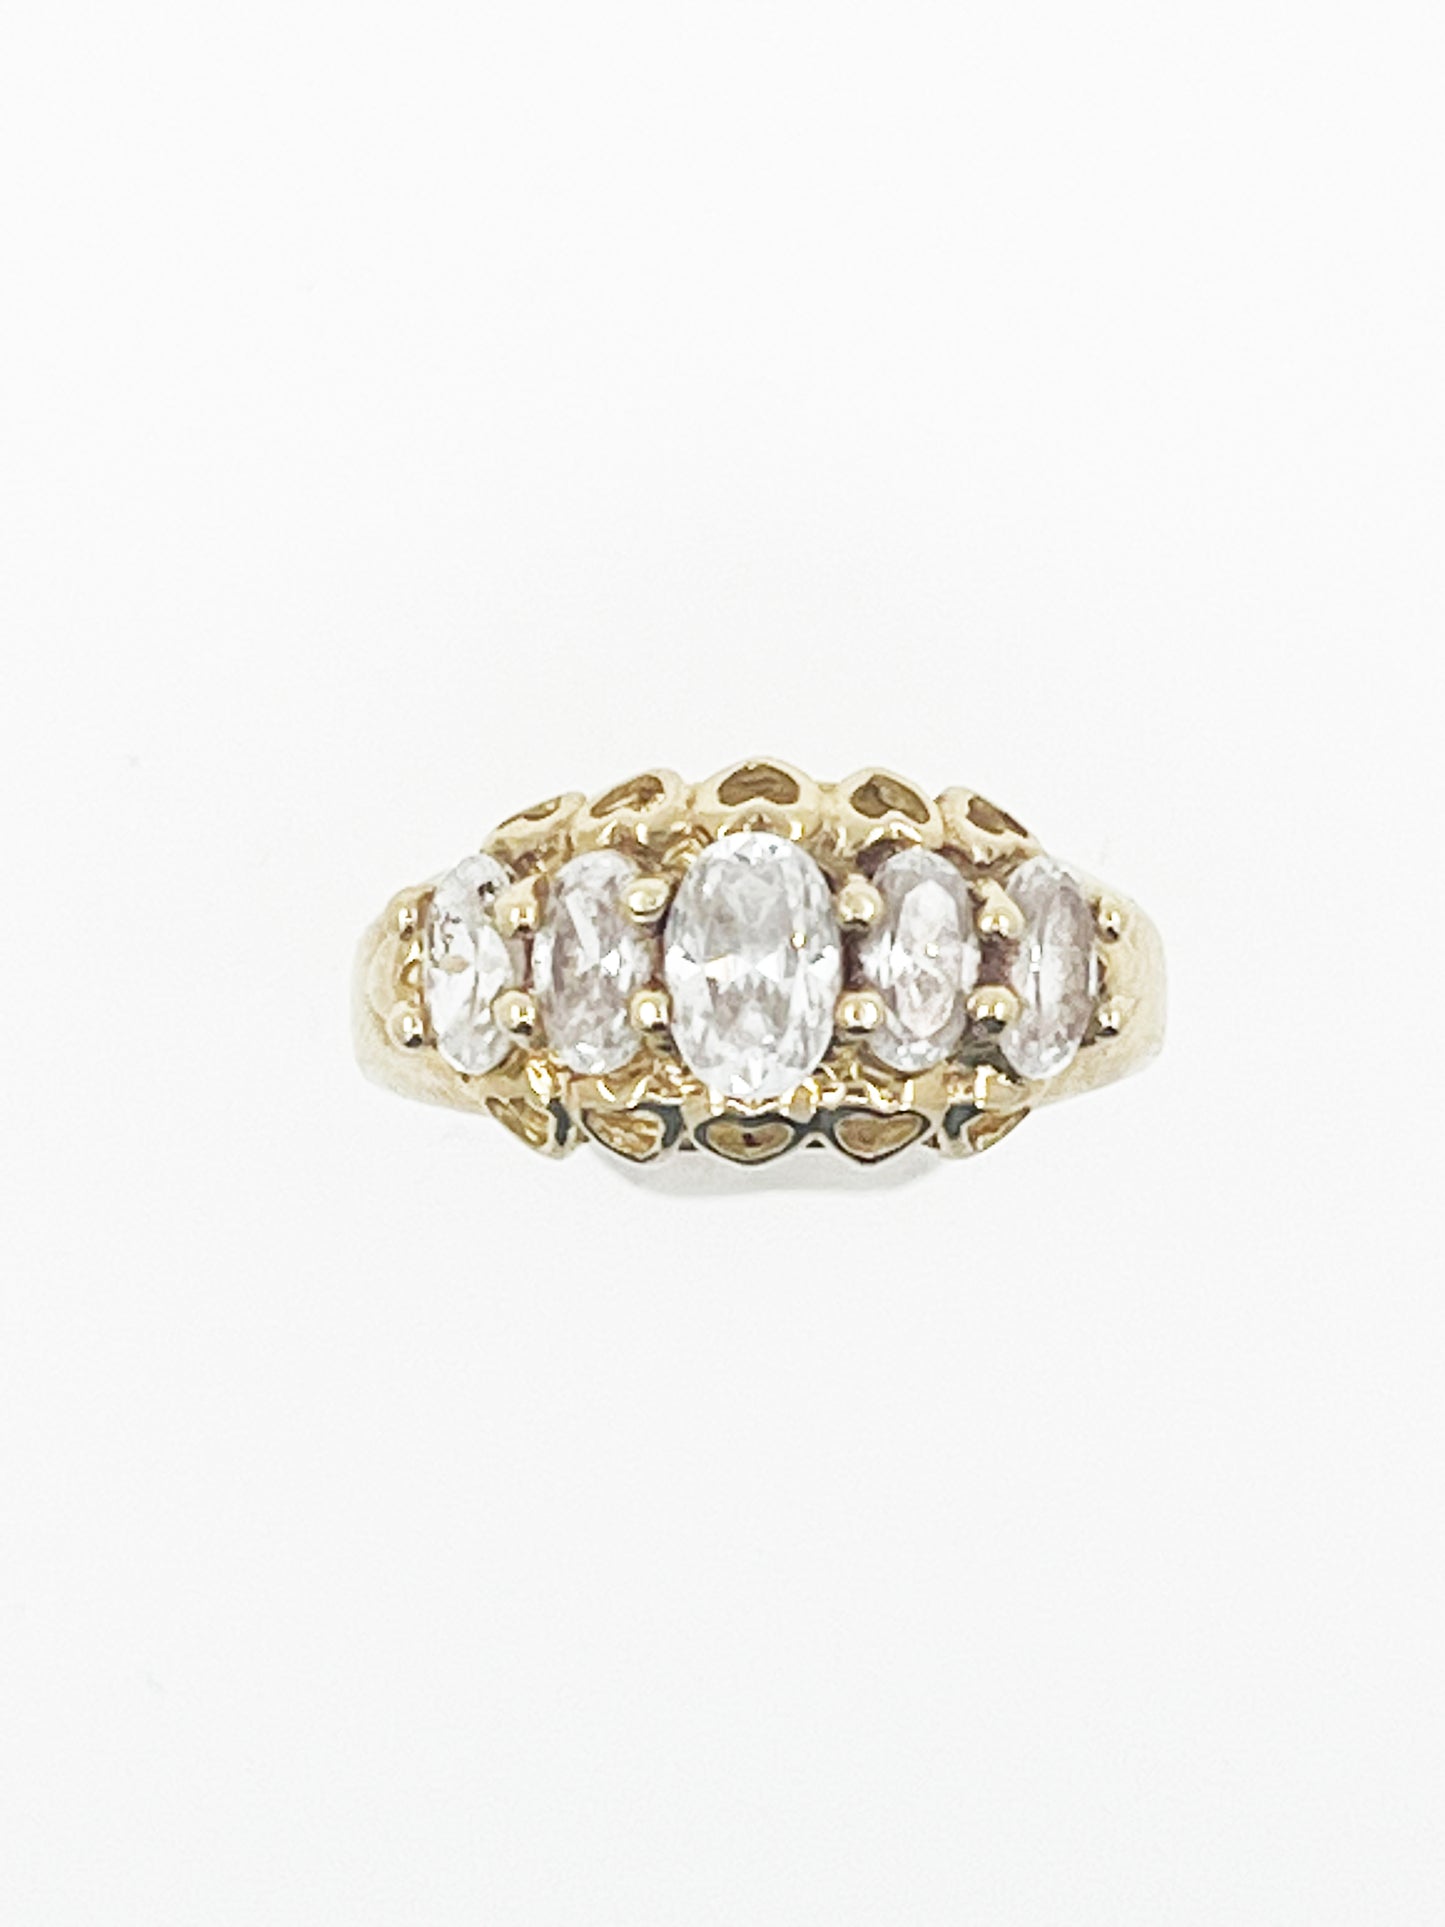 Heart CZ Ring in 14k Yellow Gold